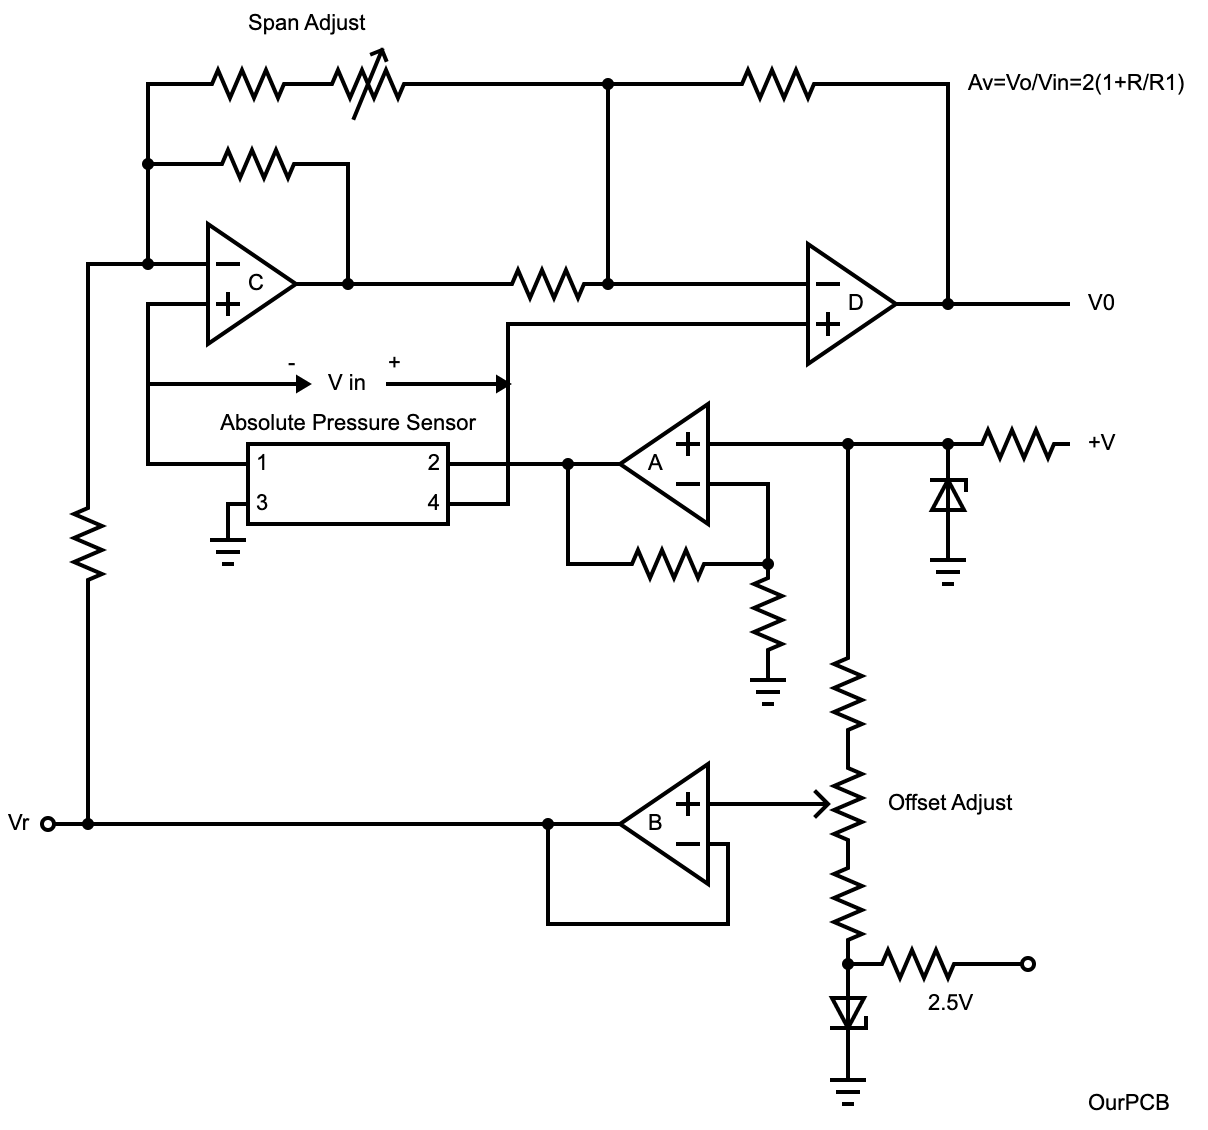 A circuit that accesses analog outputs from a Wheatstone bridge with span and offset adjustments